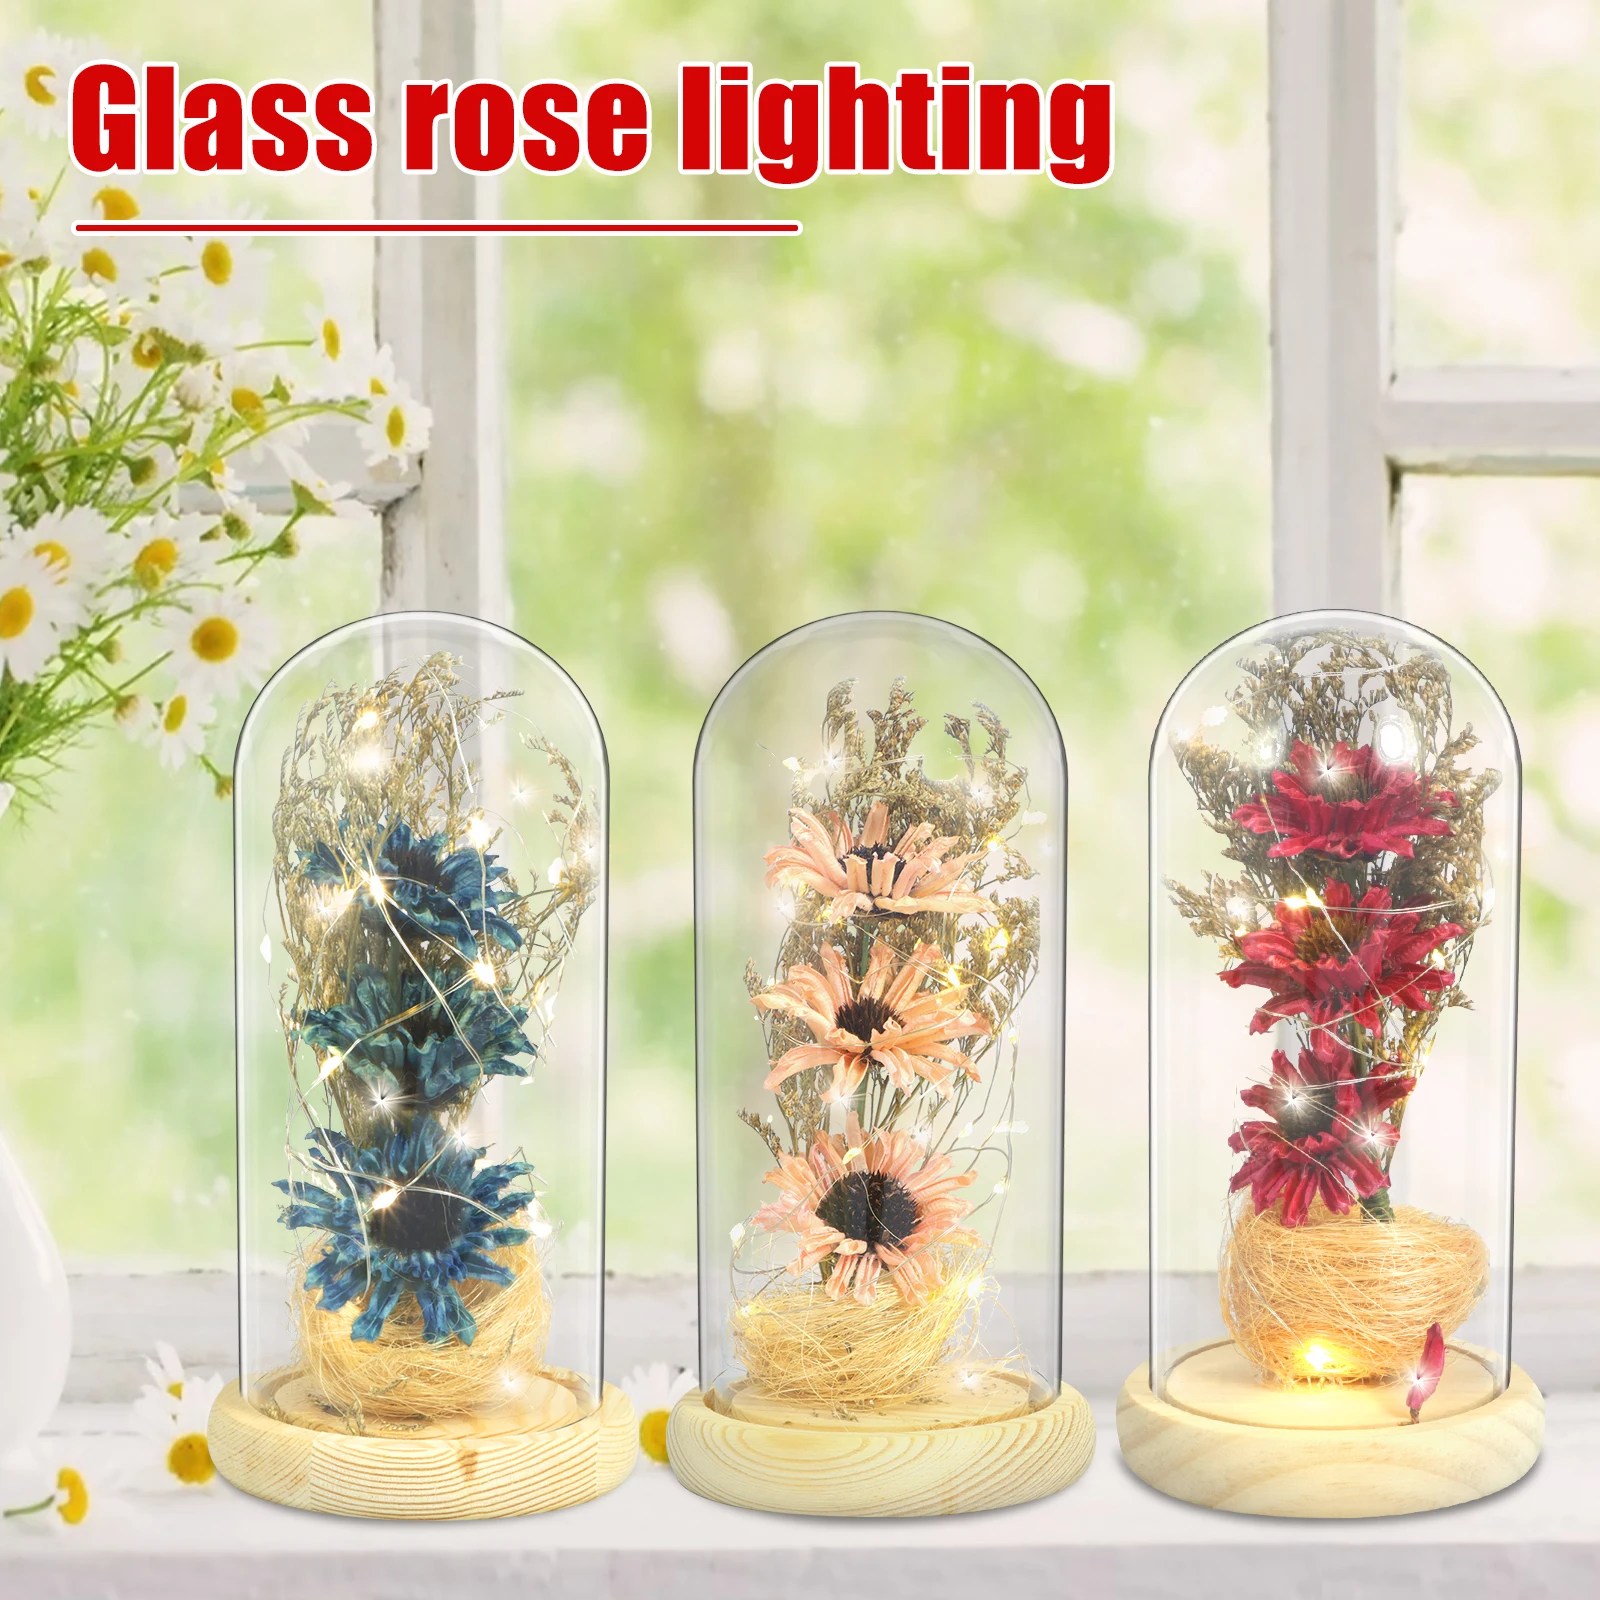 

New LED Sunflower Lamp Battery Operated Sunflower Glass Light Creative Eternal Sunflower in Glass Dome Decorative Artificial